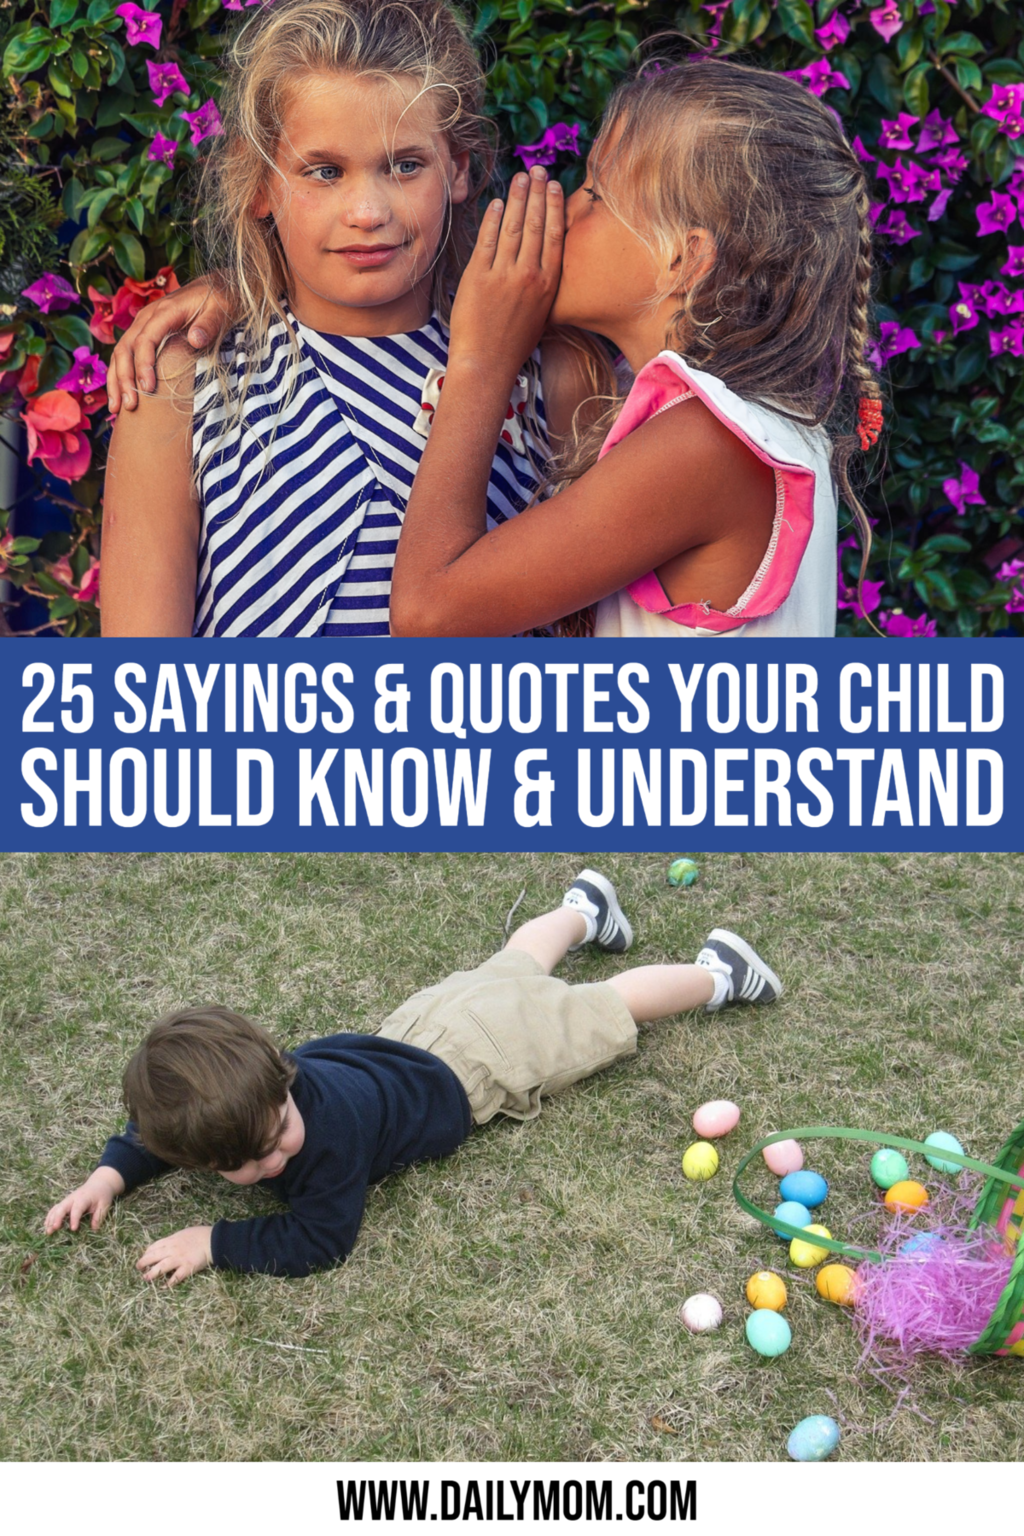 25 Well-Known Sayings And Quotes Your Child Should Know And Understand